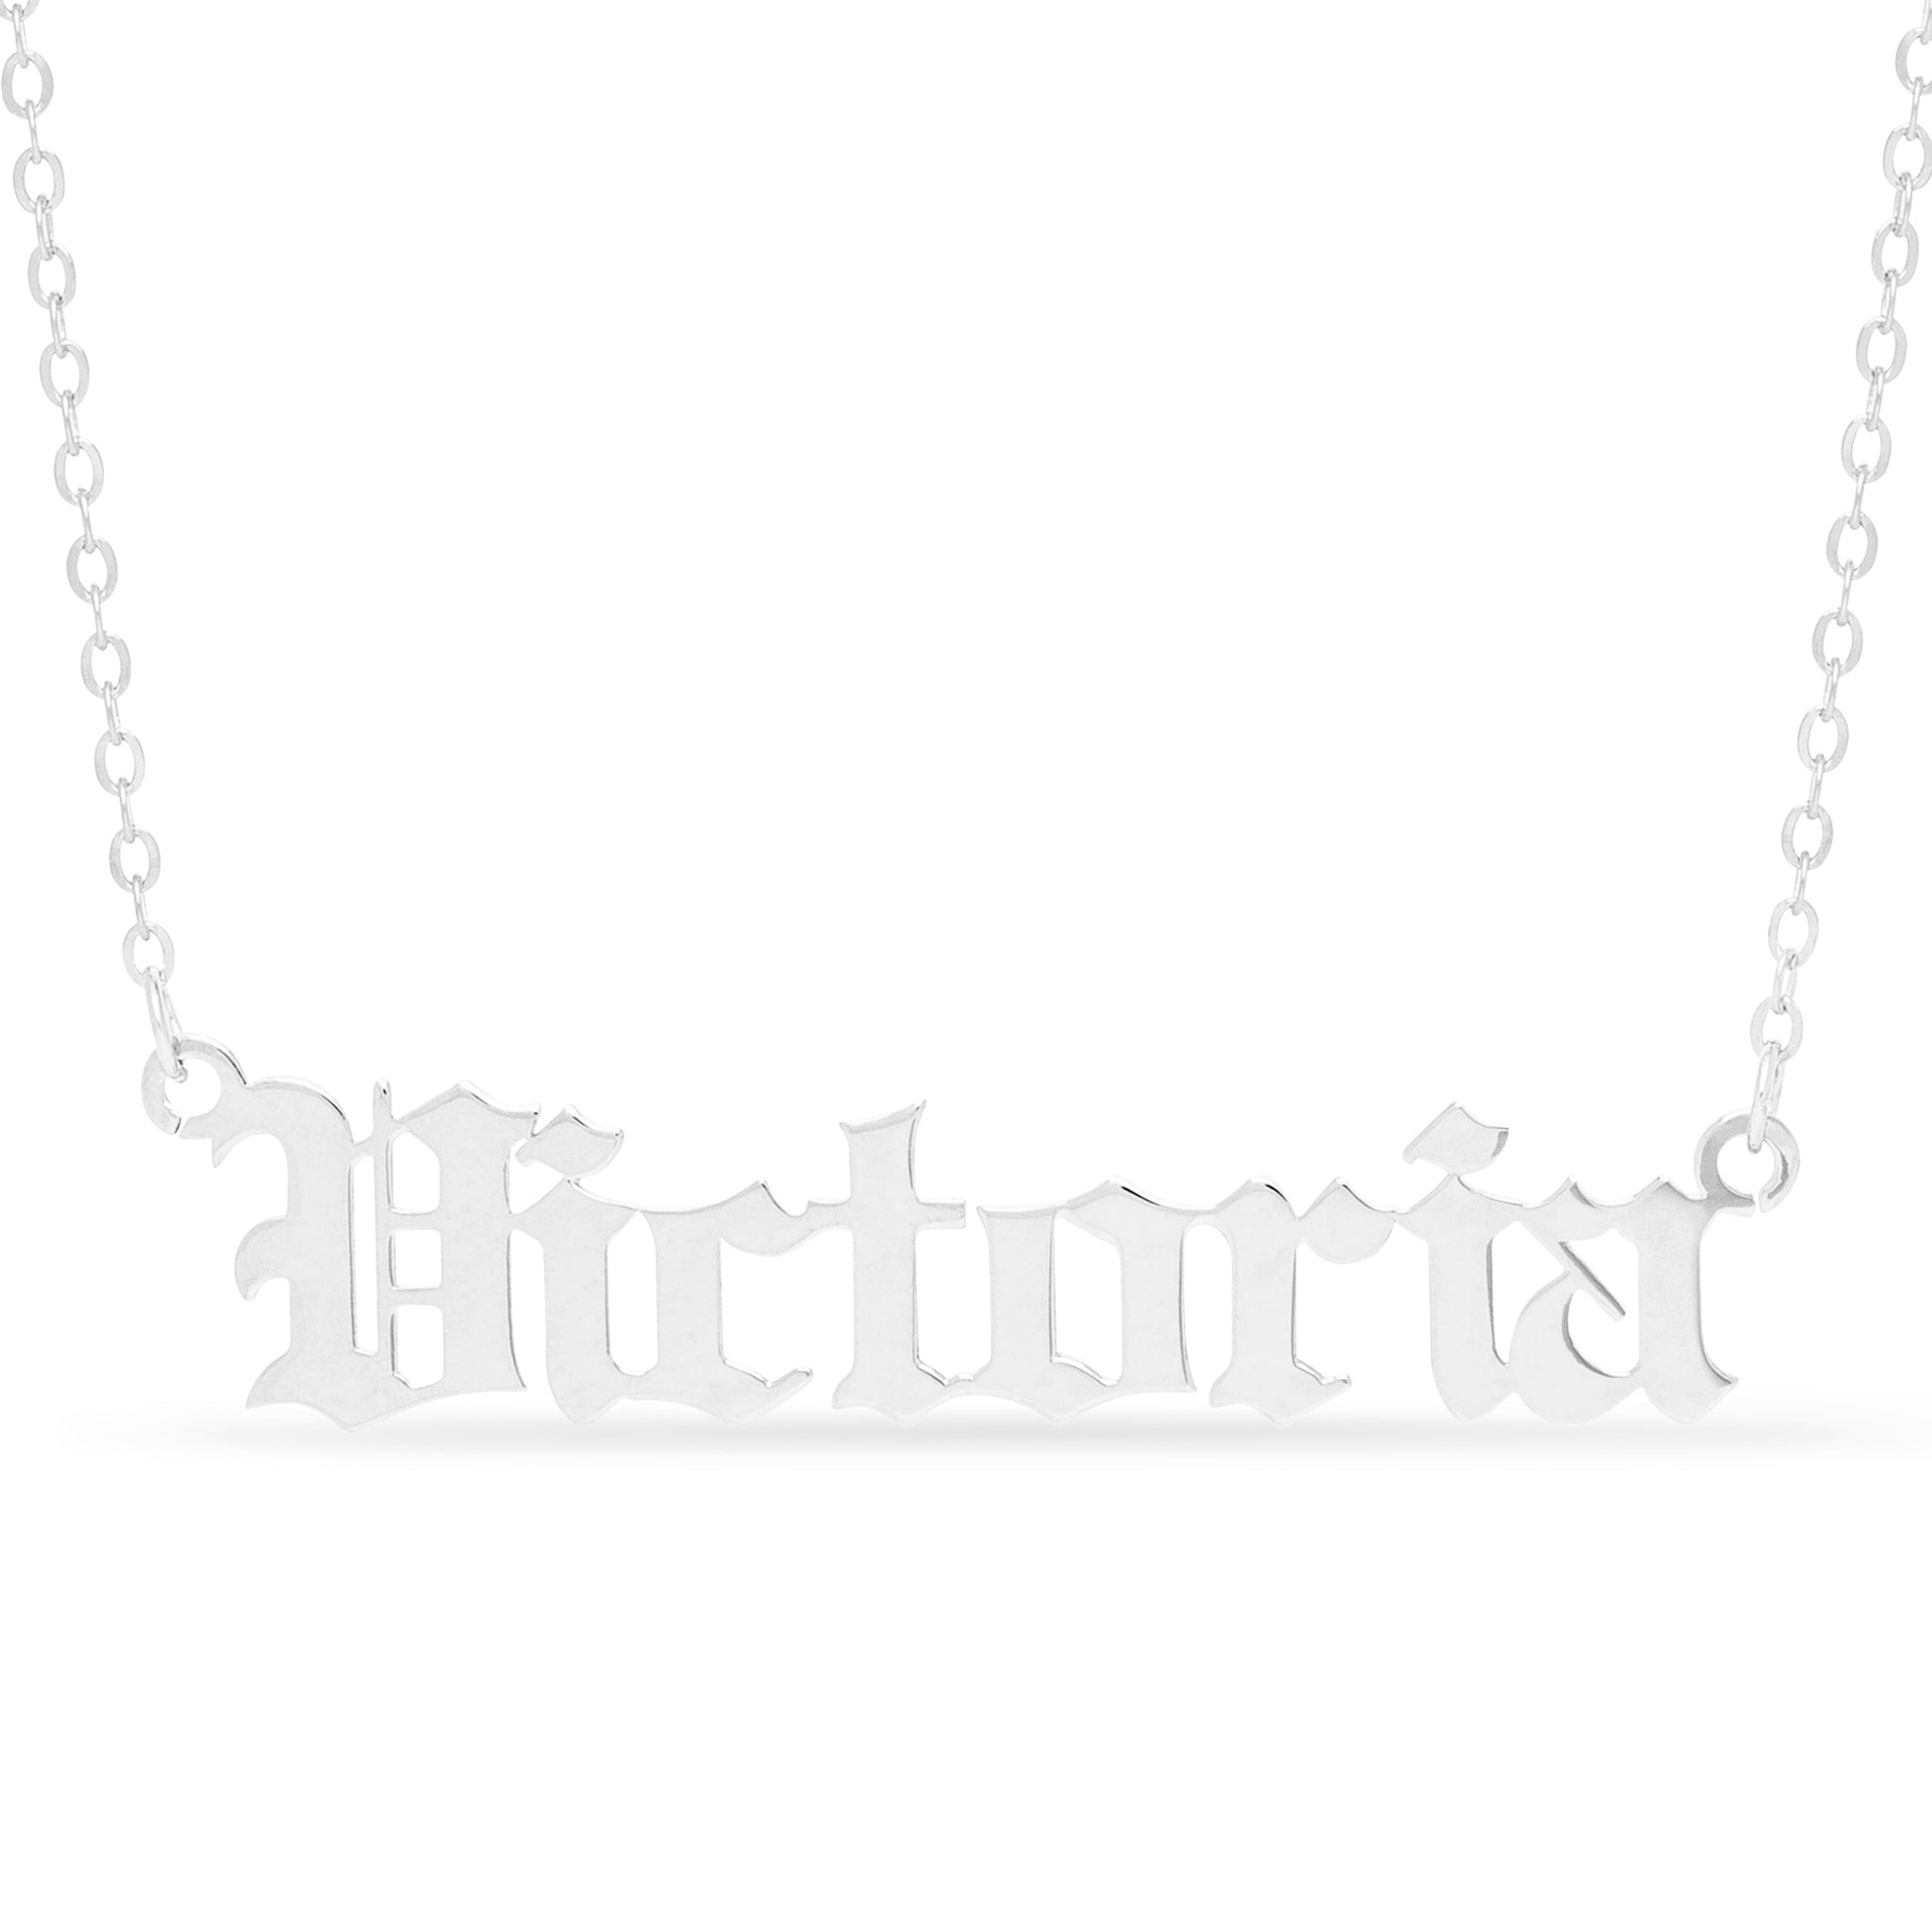 Old English Style Name Necklace